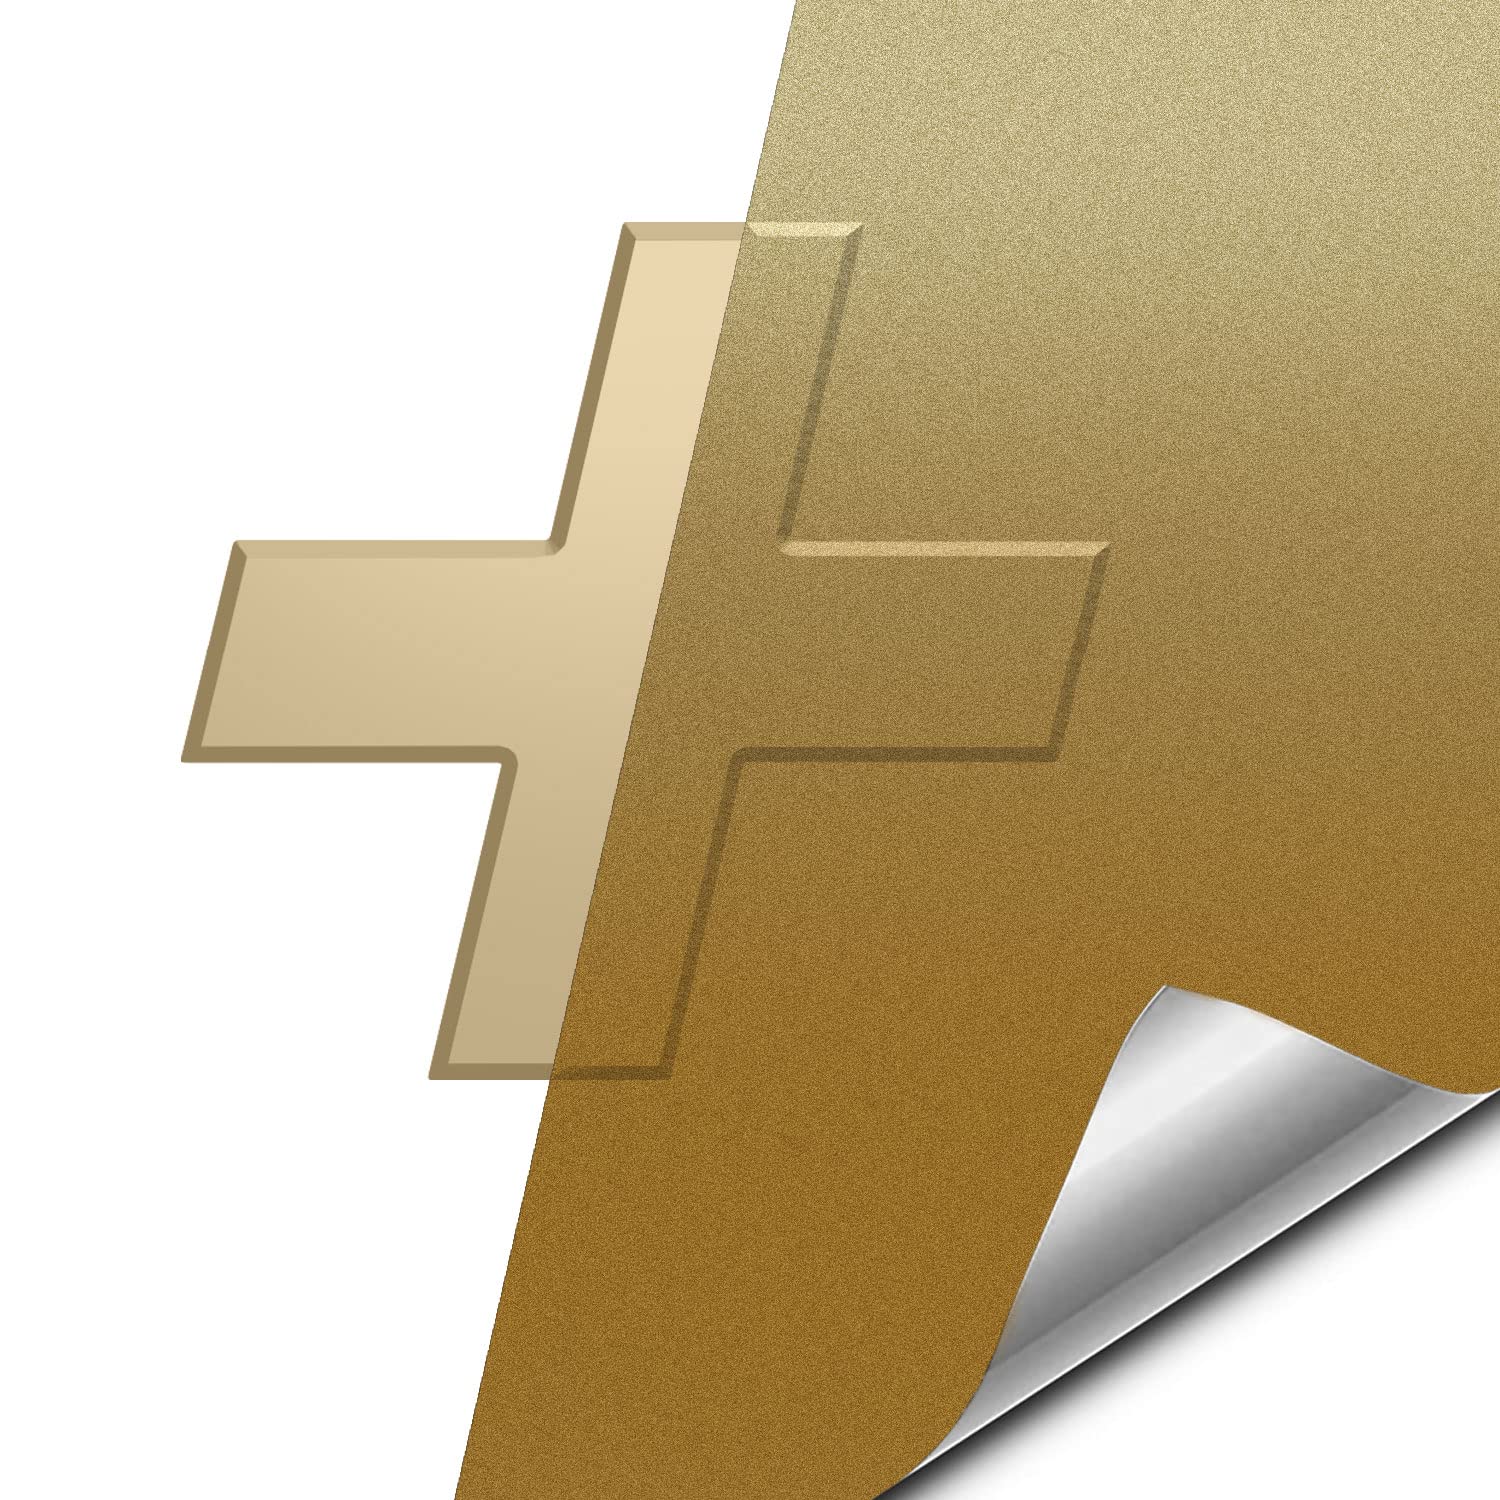 VViViD Auto Emblem Vinyl Wrap, Matte Pearl Gold, Compatible With Chevy Bowtie Logo, 11.8 Inches x 4 Inches sheets (x2)